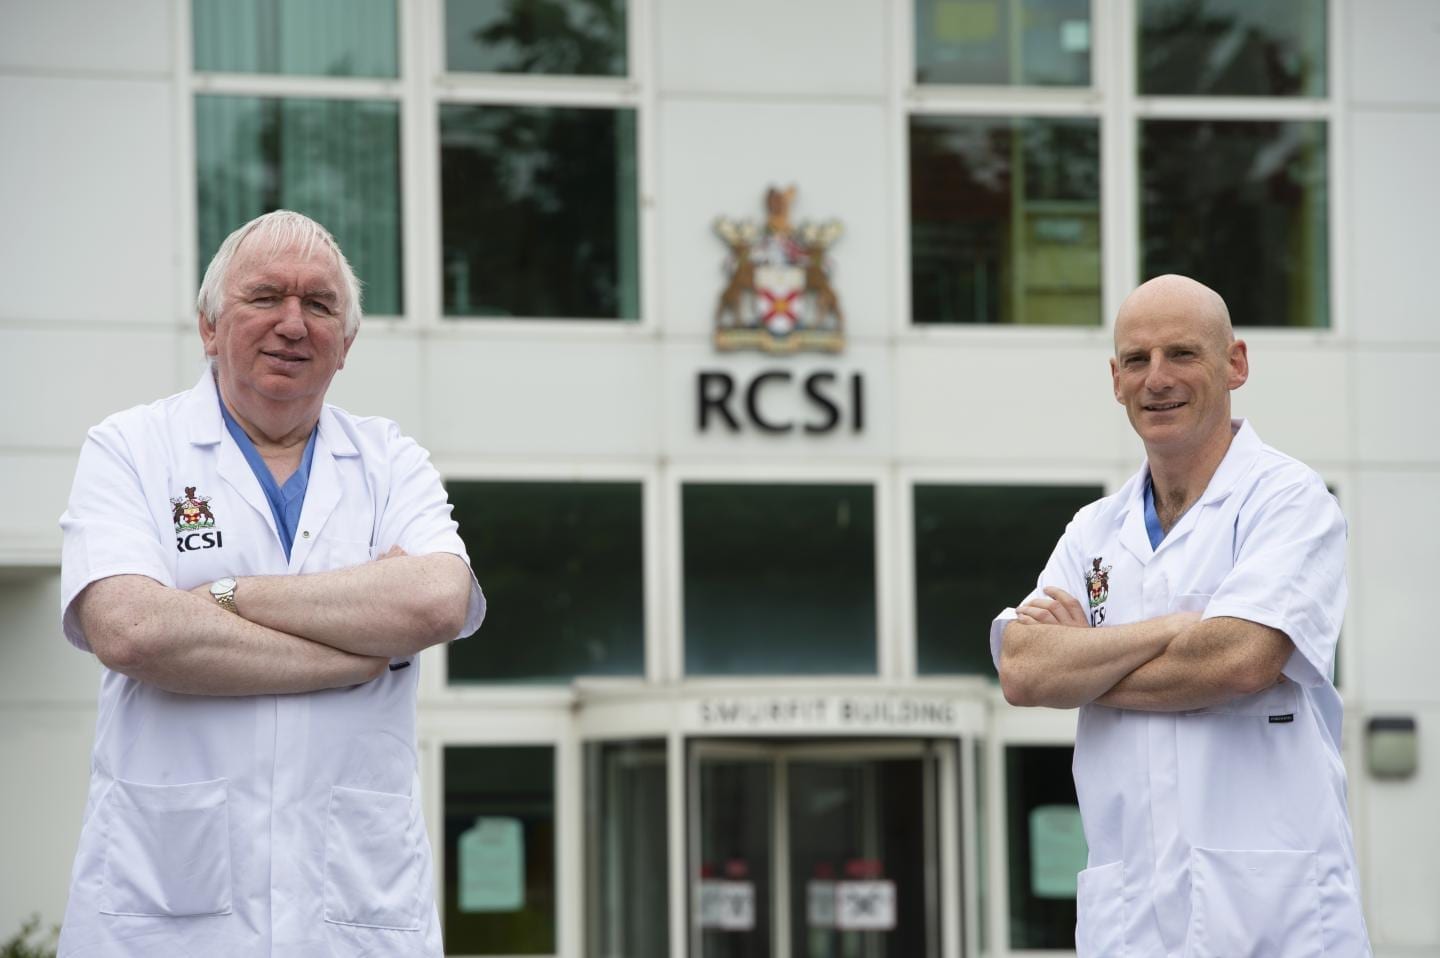 Professor Gerry McElvaney (left), the study's senior author and a consultant in Beaumont Hospital, and Professor Ger Curley (right) stand in front of the RCSI Education and Research Centre in Beaumont Hospital, Dublin.

CREDIT
Ray Lohan